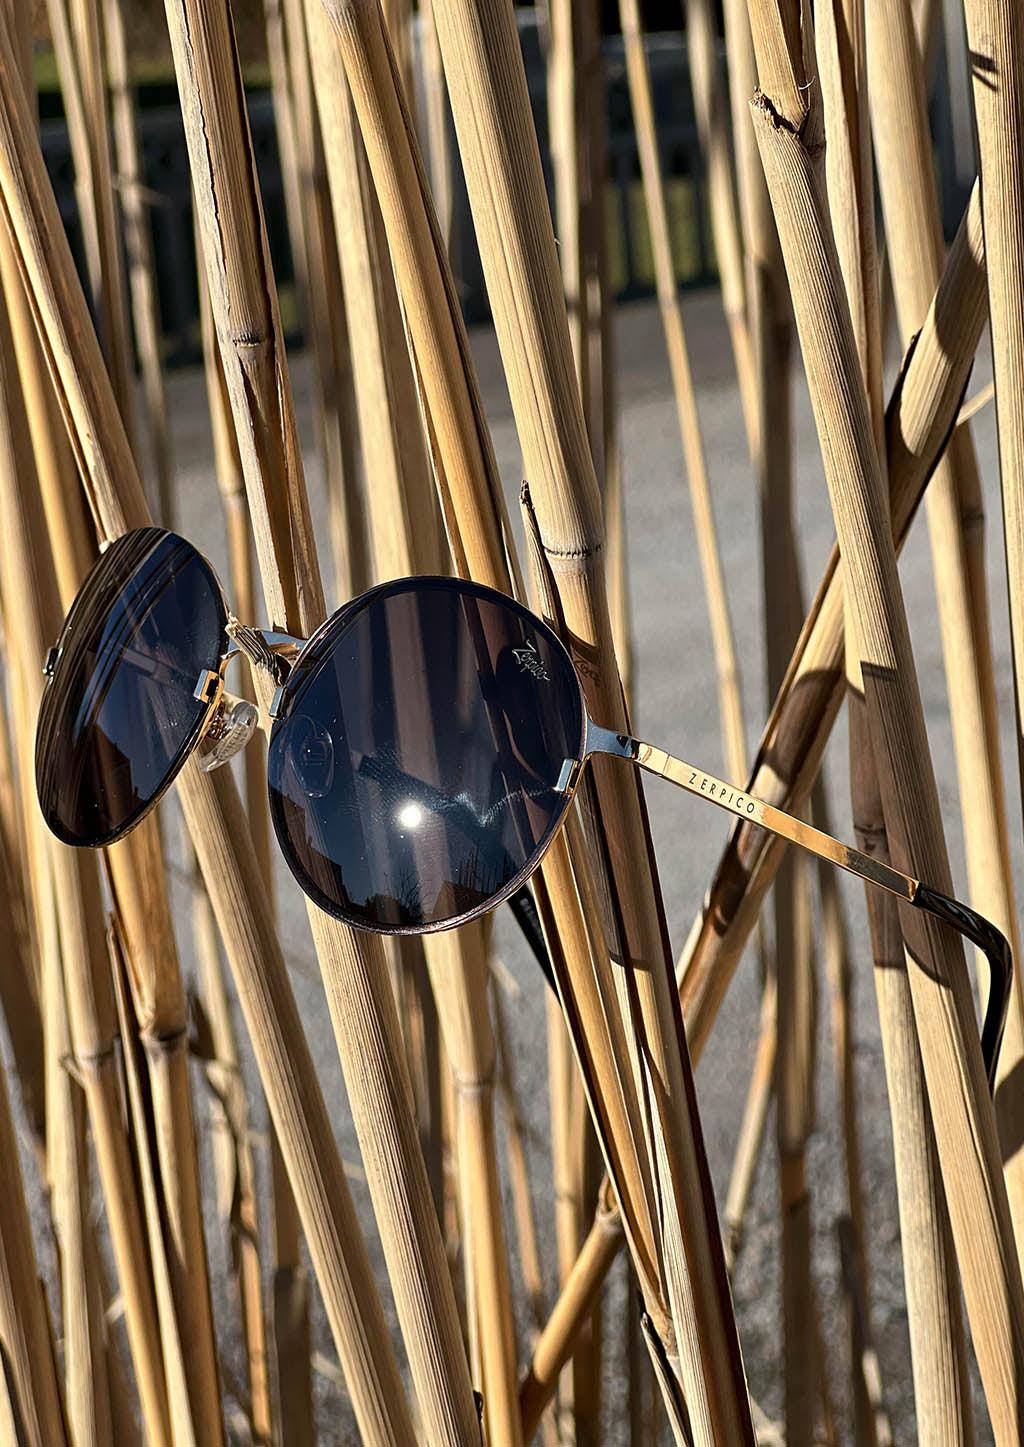 Titan - Titanium Round Sunglasses V2 - 24K Gold Plated with real gold. Photo taken outside with bamboo.